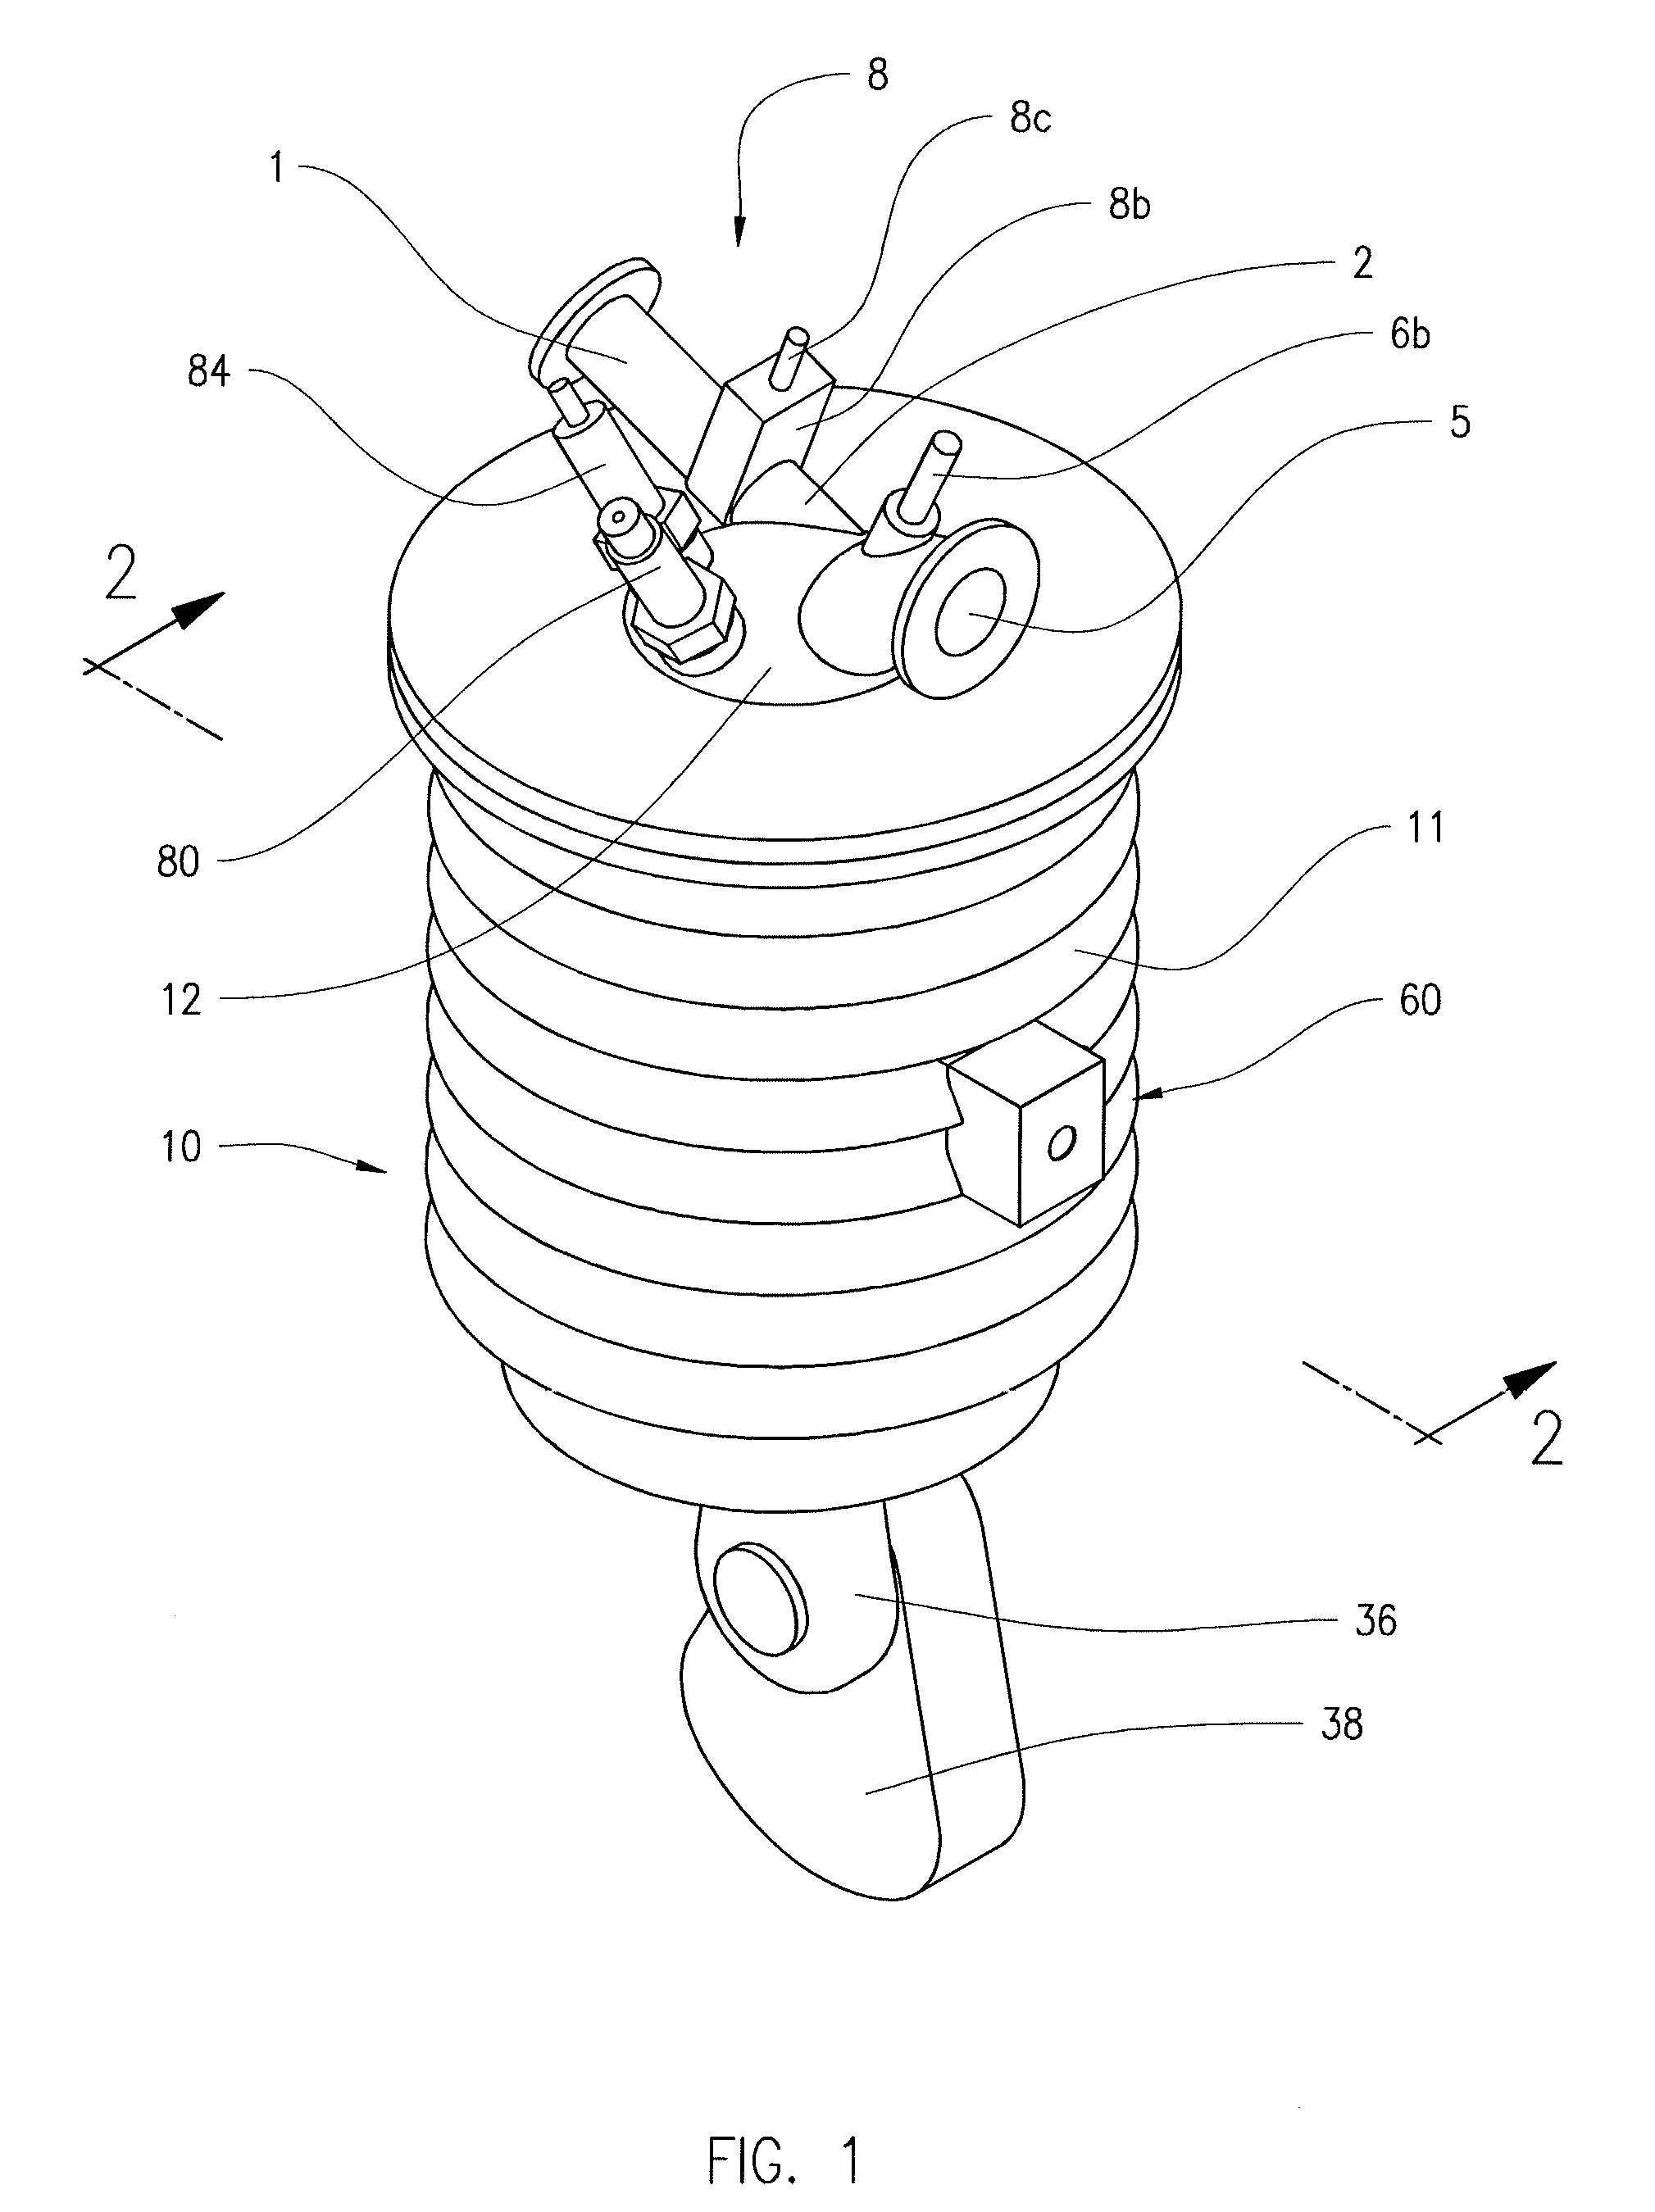 Full expansion internal combustion engine with co-annular pistons